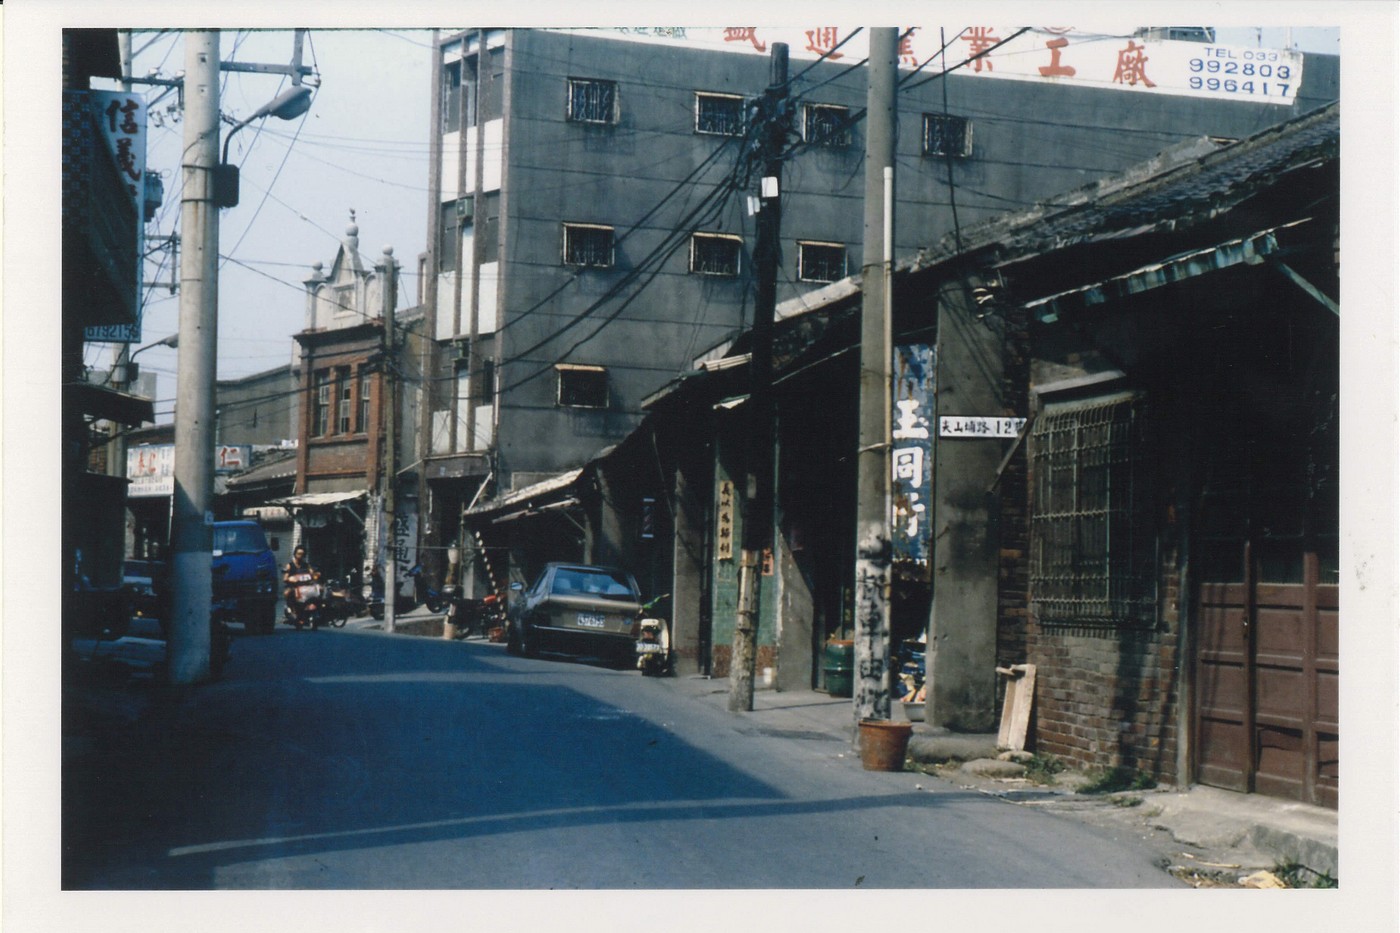 Jianshanpu Road in 1979. The highest building in the photo is the house of Sheng Tung Kiln. Provided by Ching Bau Yau.